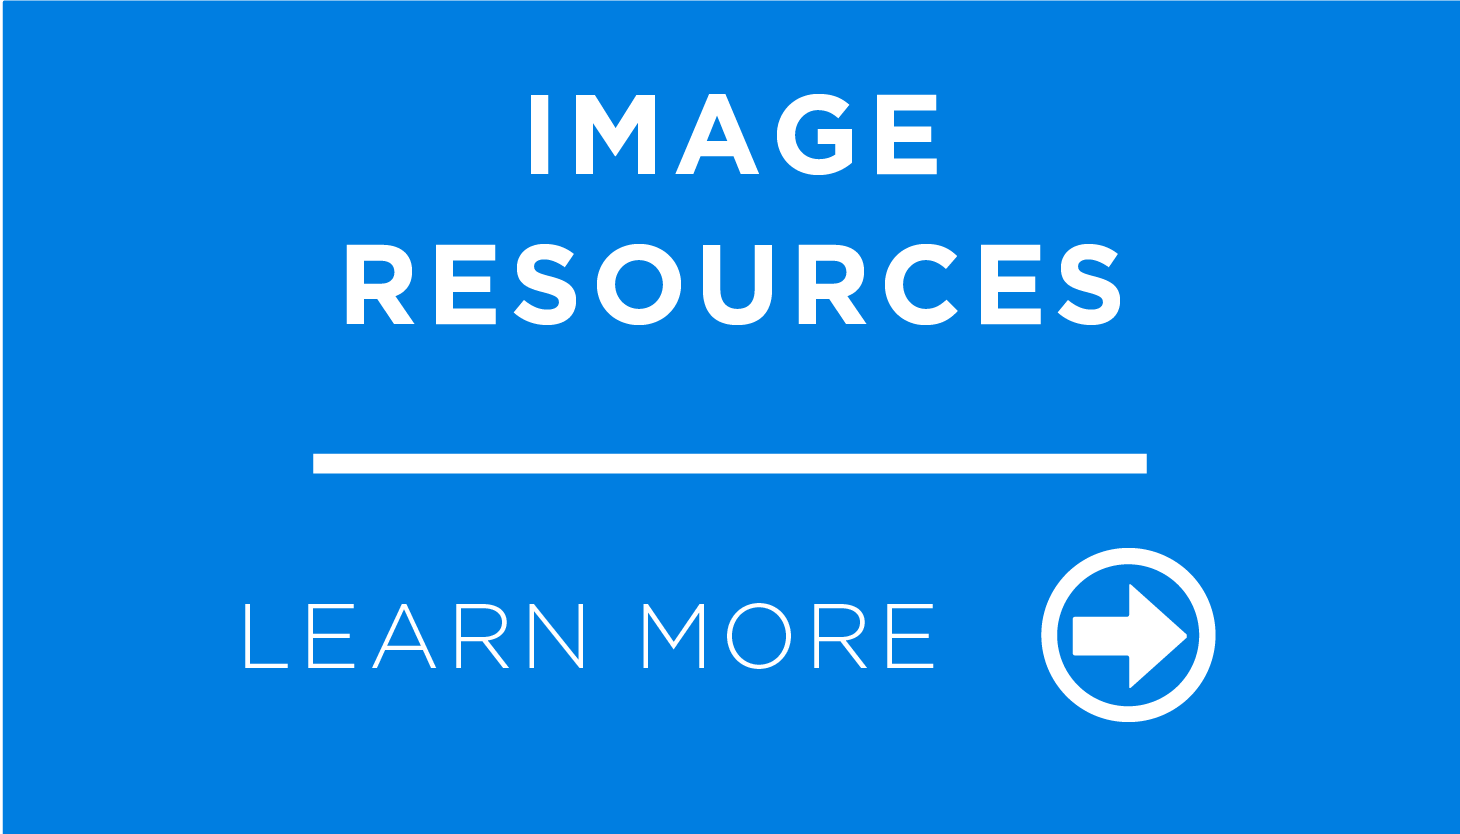 10 free images sources you should know about!